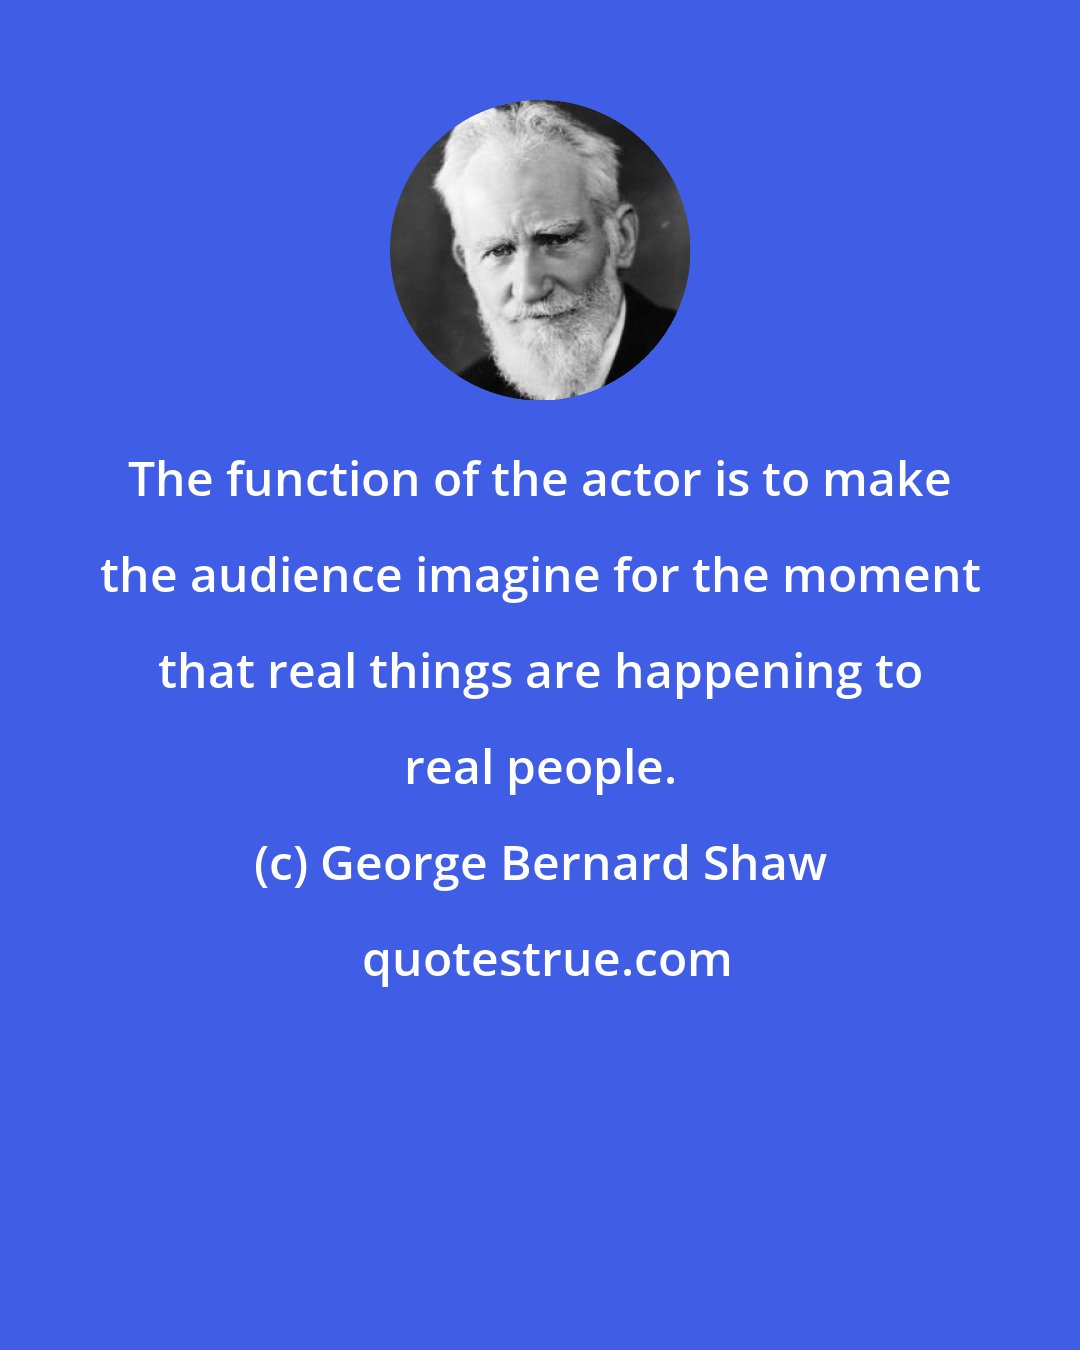 George Bernard Shaw: The function of the actor is to make the audience imagine for the moment that real things are happening to real people.